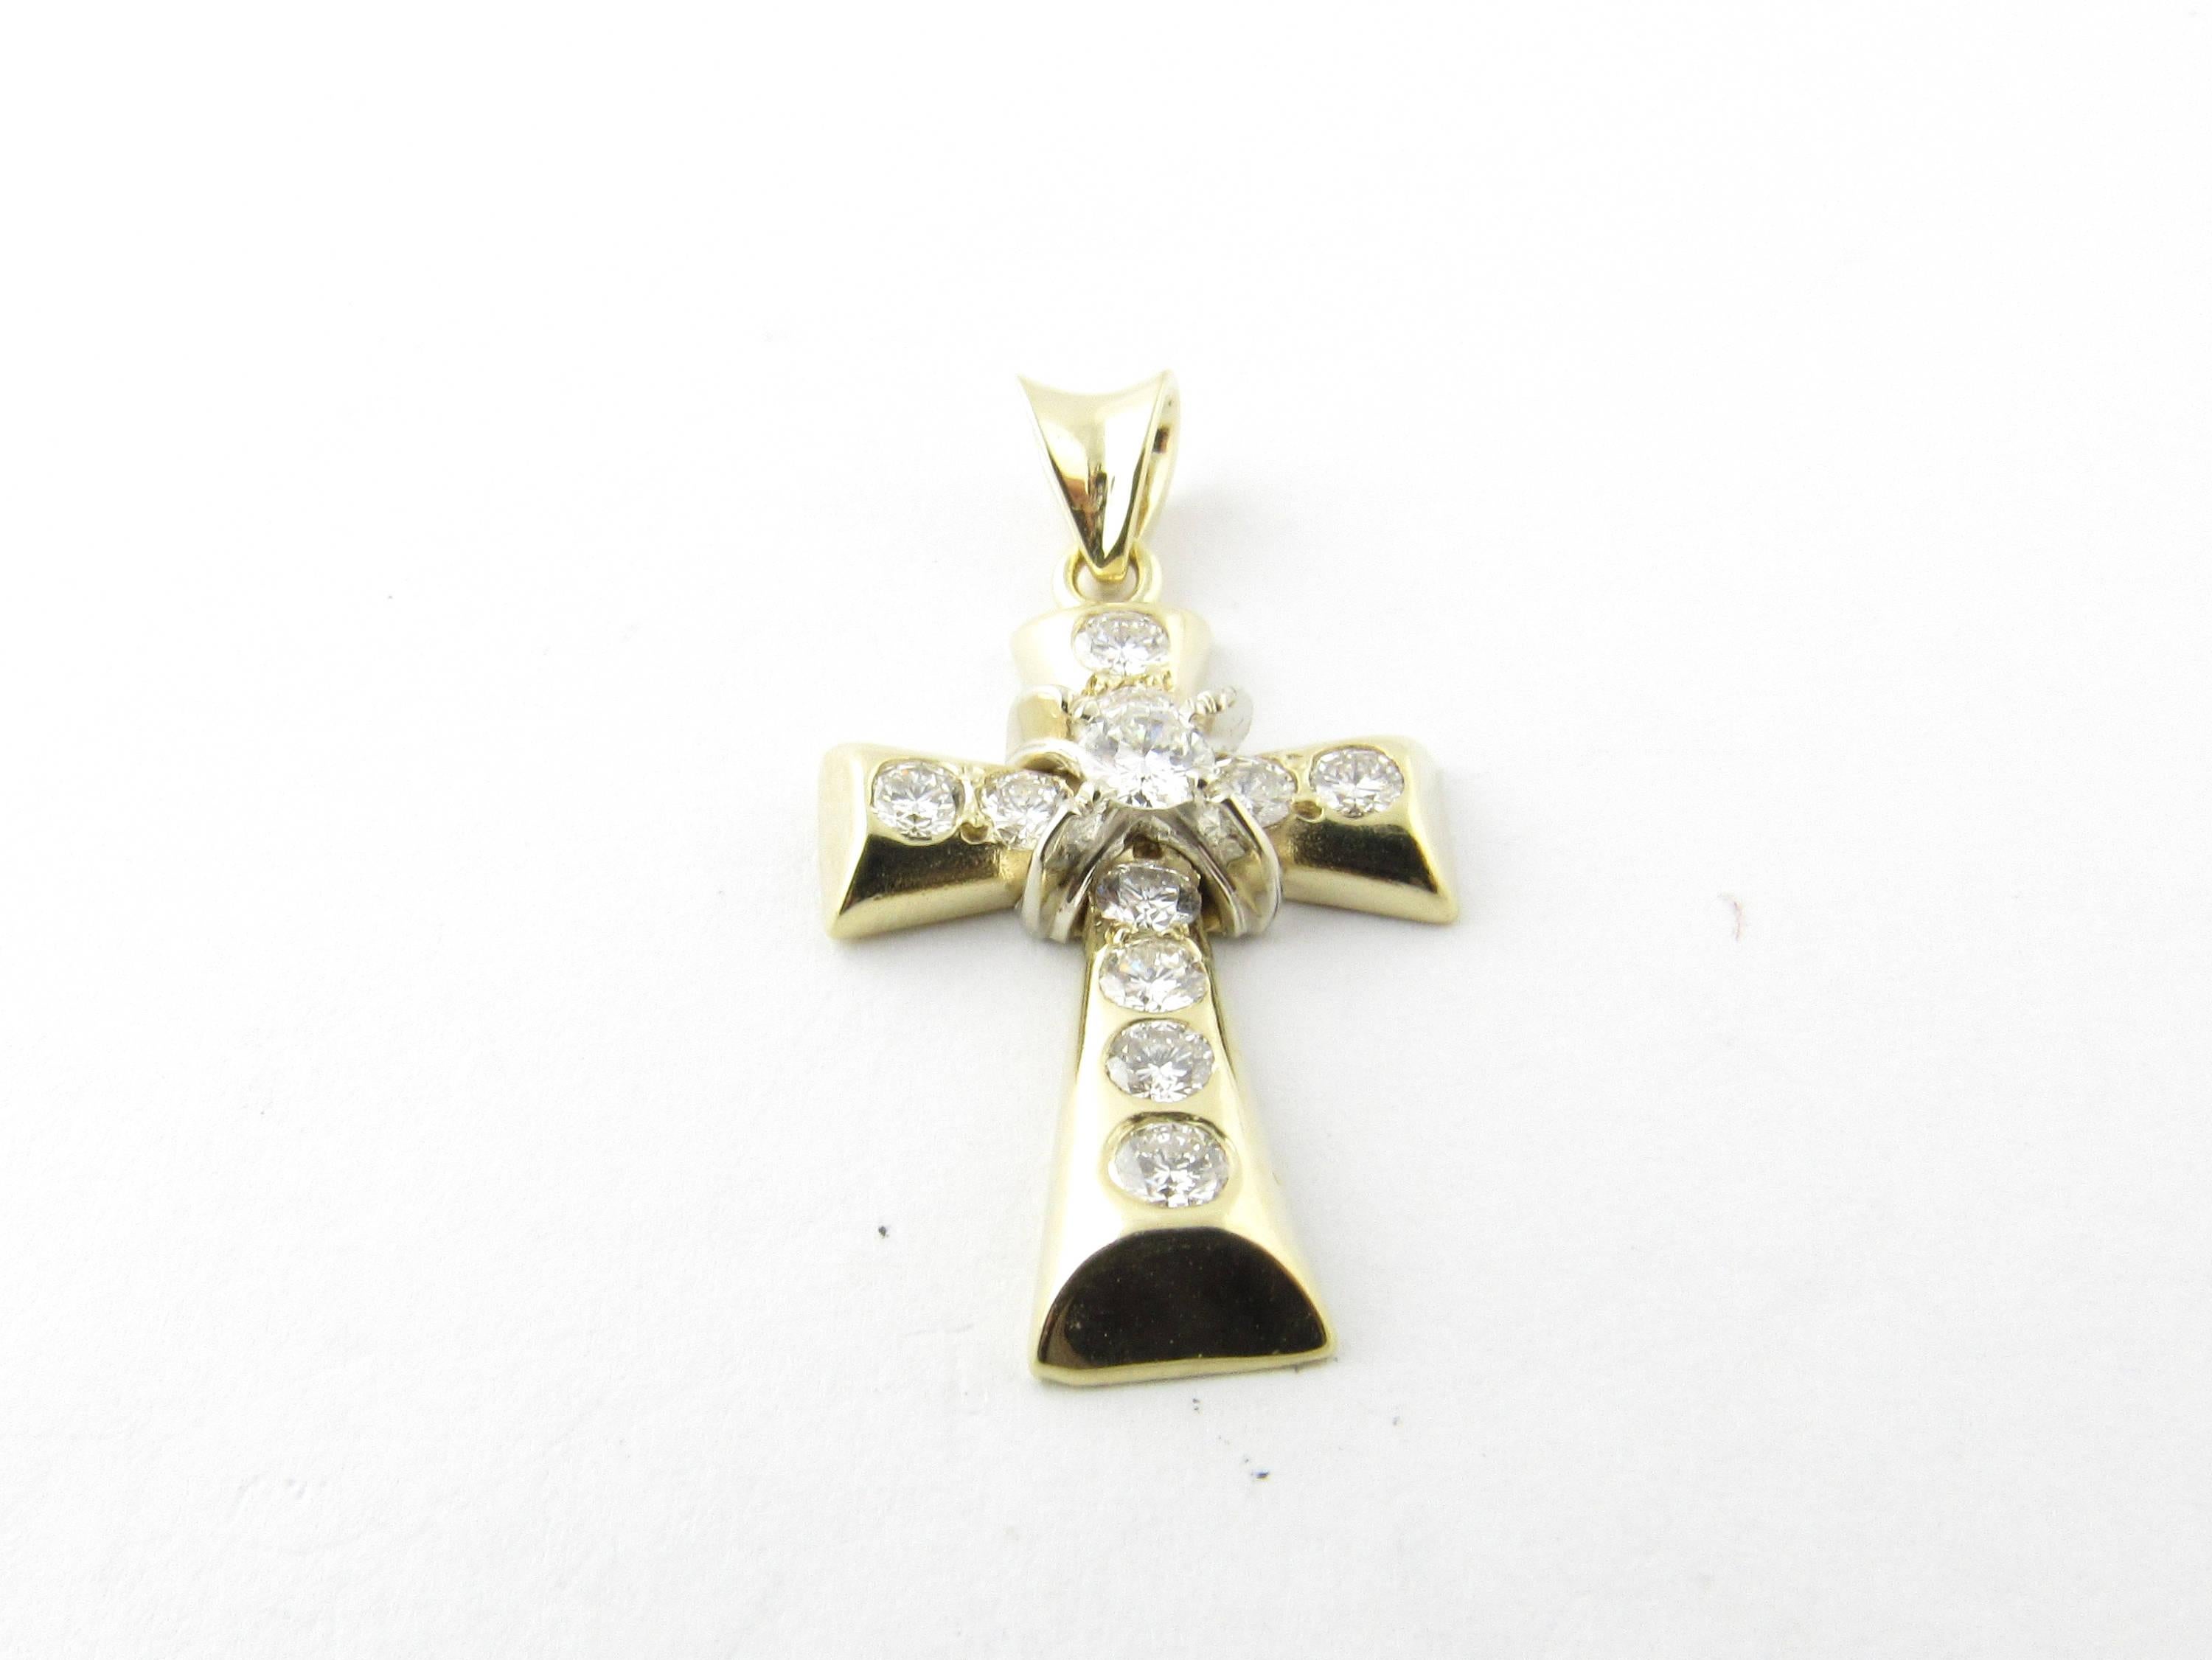 Vintage 14 Karat Yellow Gold Diamond Cross Pendant

This dazzling pendant features 11 round brilliant cut diamonds set in polished 14K yellow gold.

Approximate total diamond weight: 1.03 cts. (center: .15 ct., 4 x .10 ct., 6 x .08 ct.)

Diamond